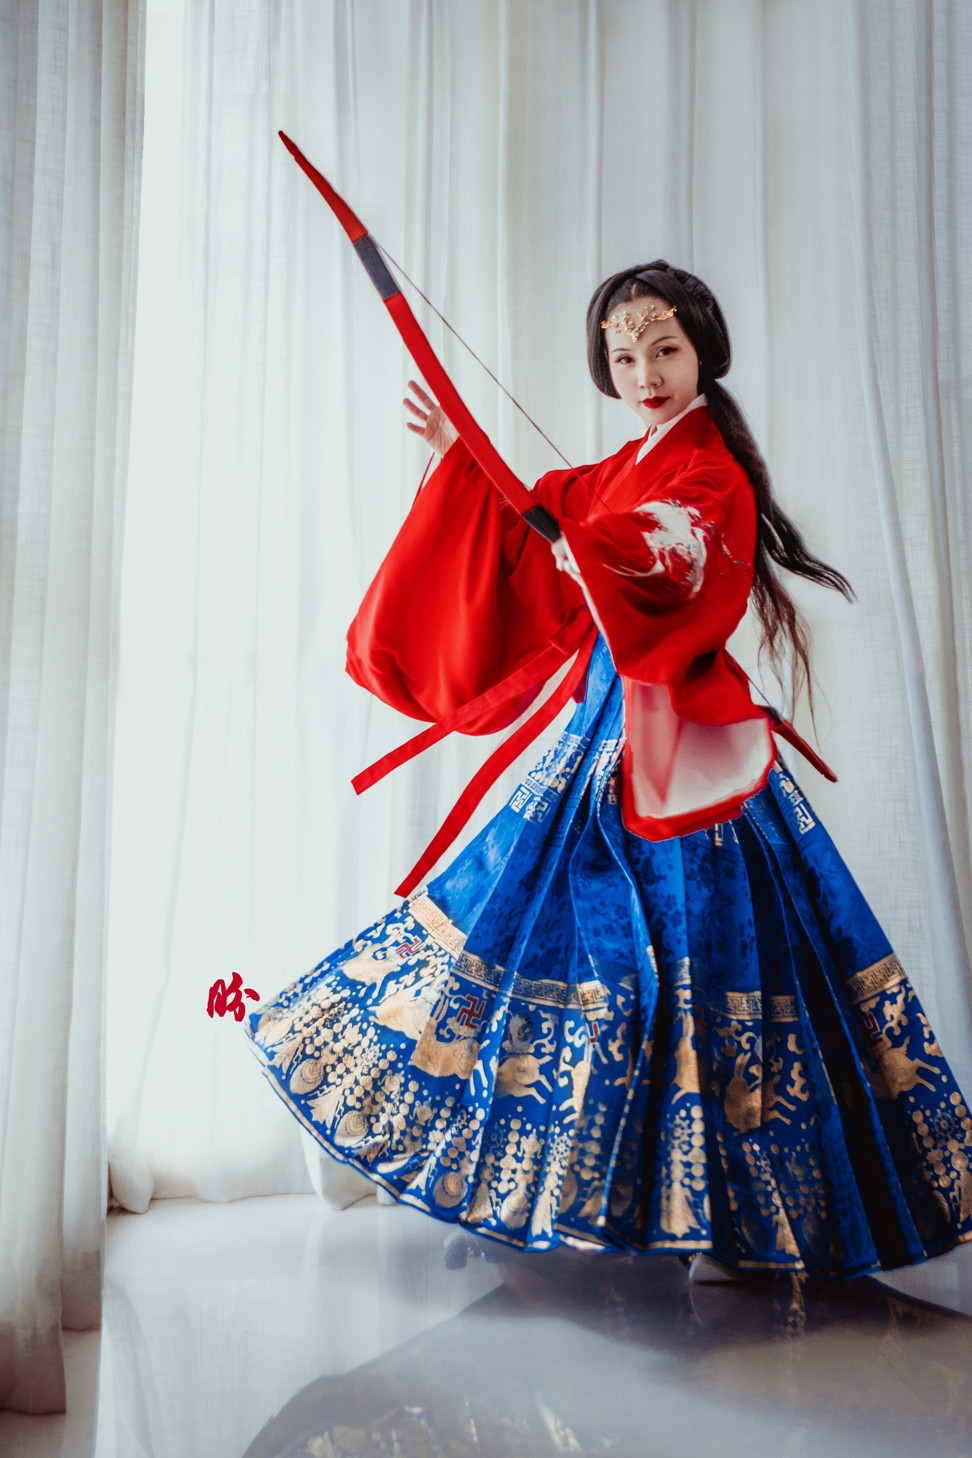 Gong Pan Pan dressed in “Hanfu”, or traditional Han Chinese clothing, to convey the image of a Chinese warrior woman like Lady Hao. Photo: Hanfugirls Collective